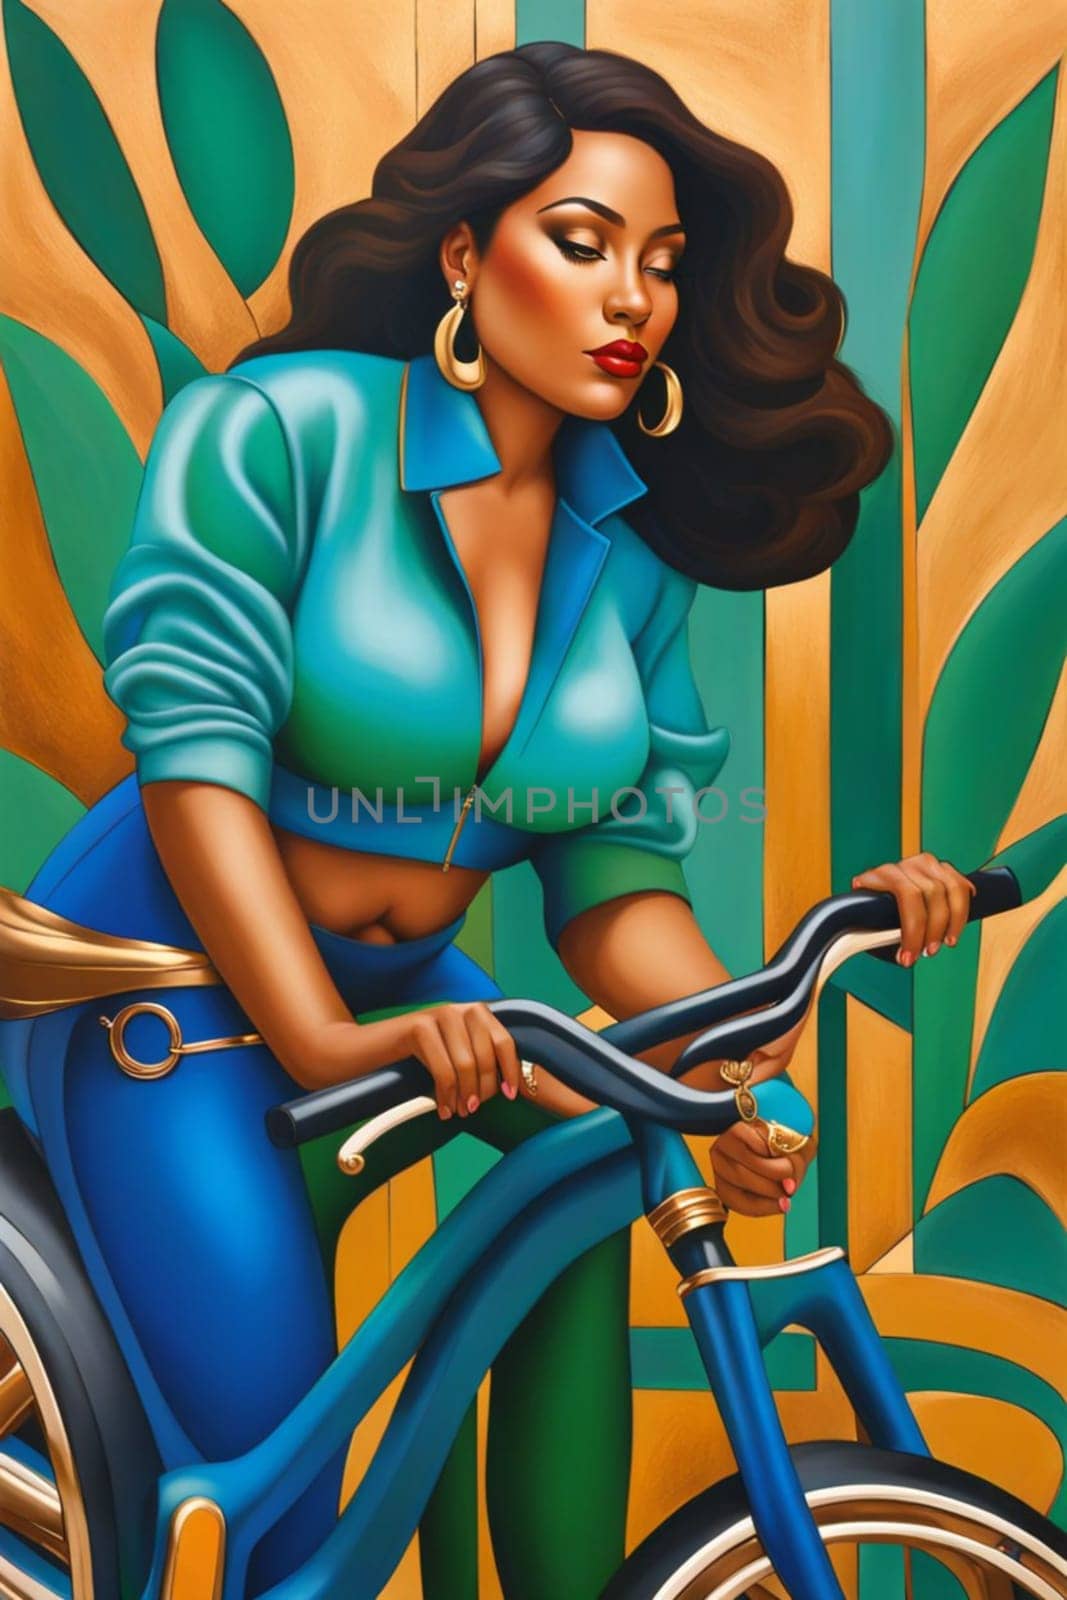 fashion portrait of modern empowered woman riding bike illustration , blue, copper and pastel tones by verbano